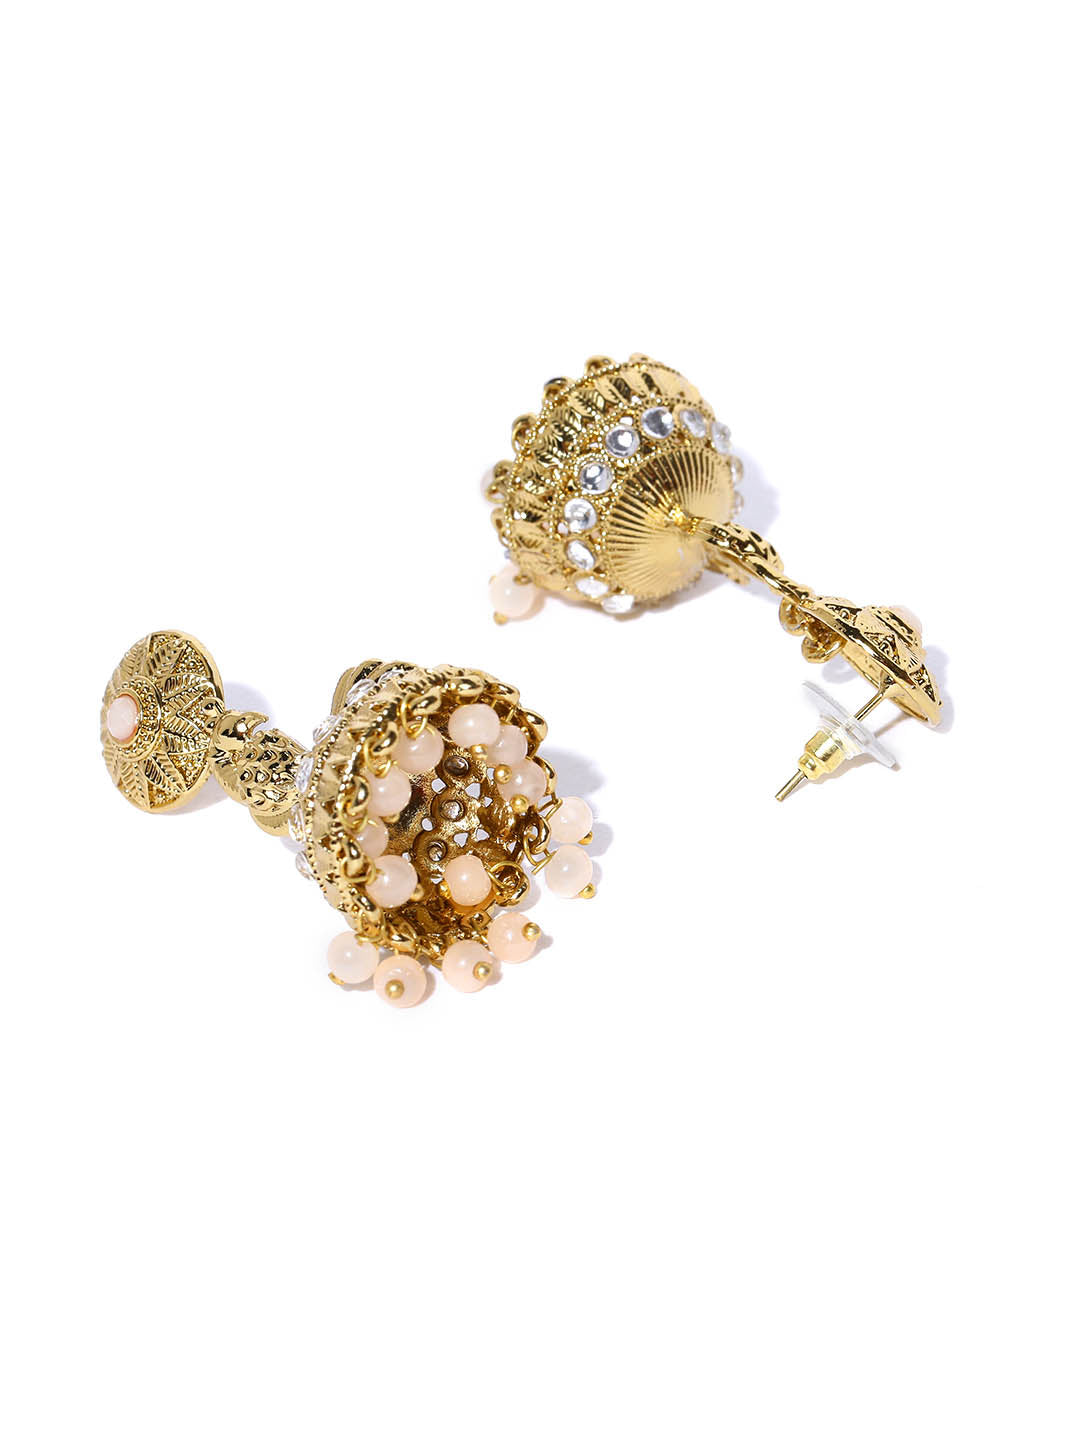 Gold-Plated Peacock Inspired Jhumka Drop Earrings with Pink Beads Drop